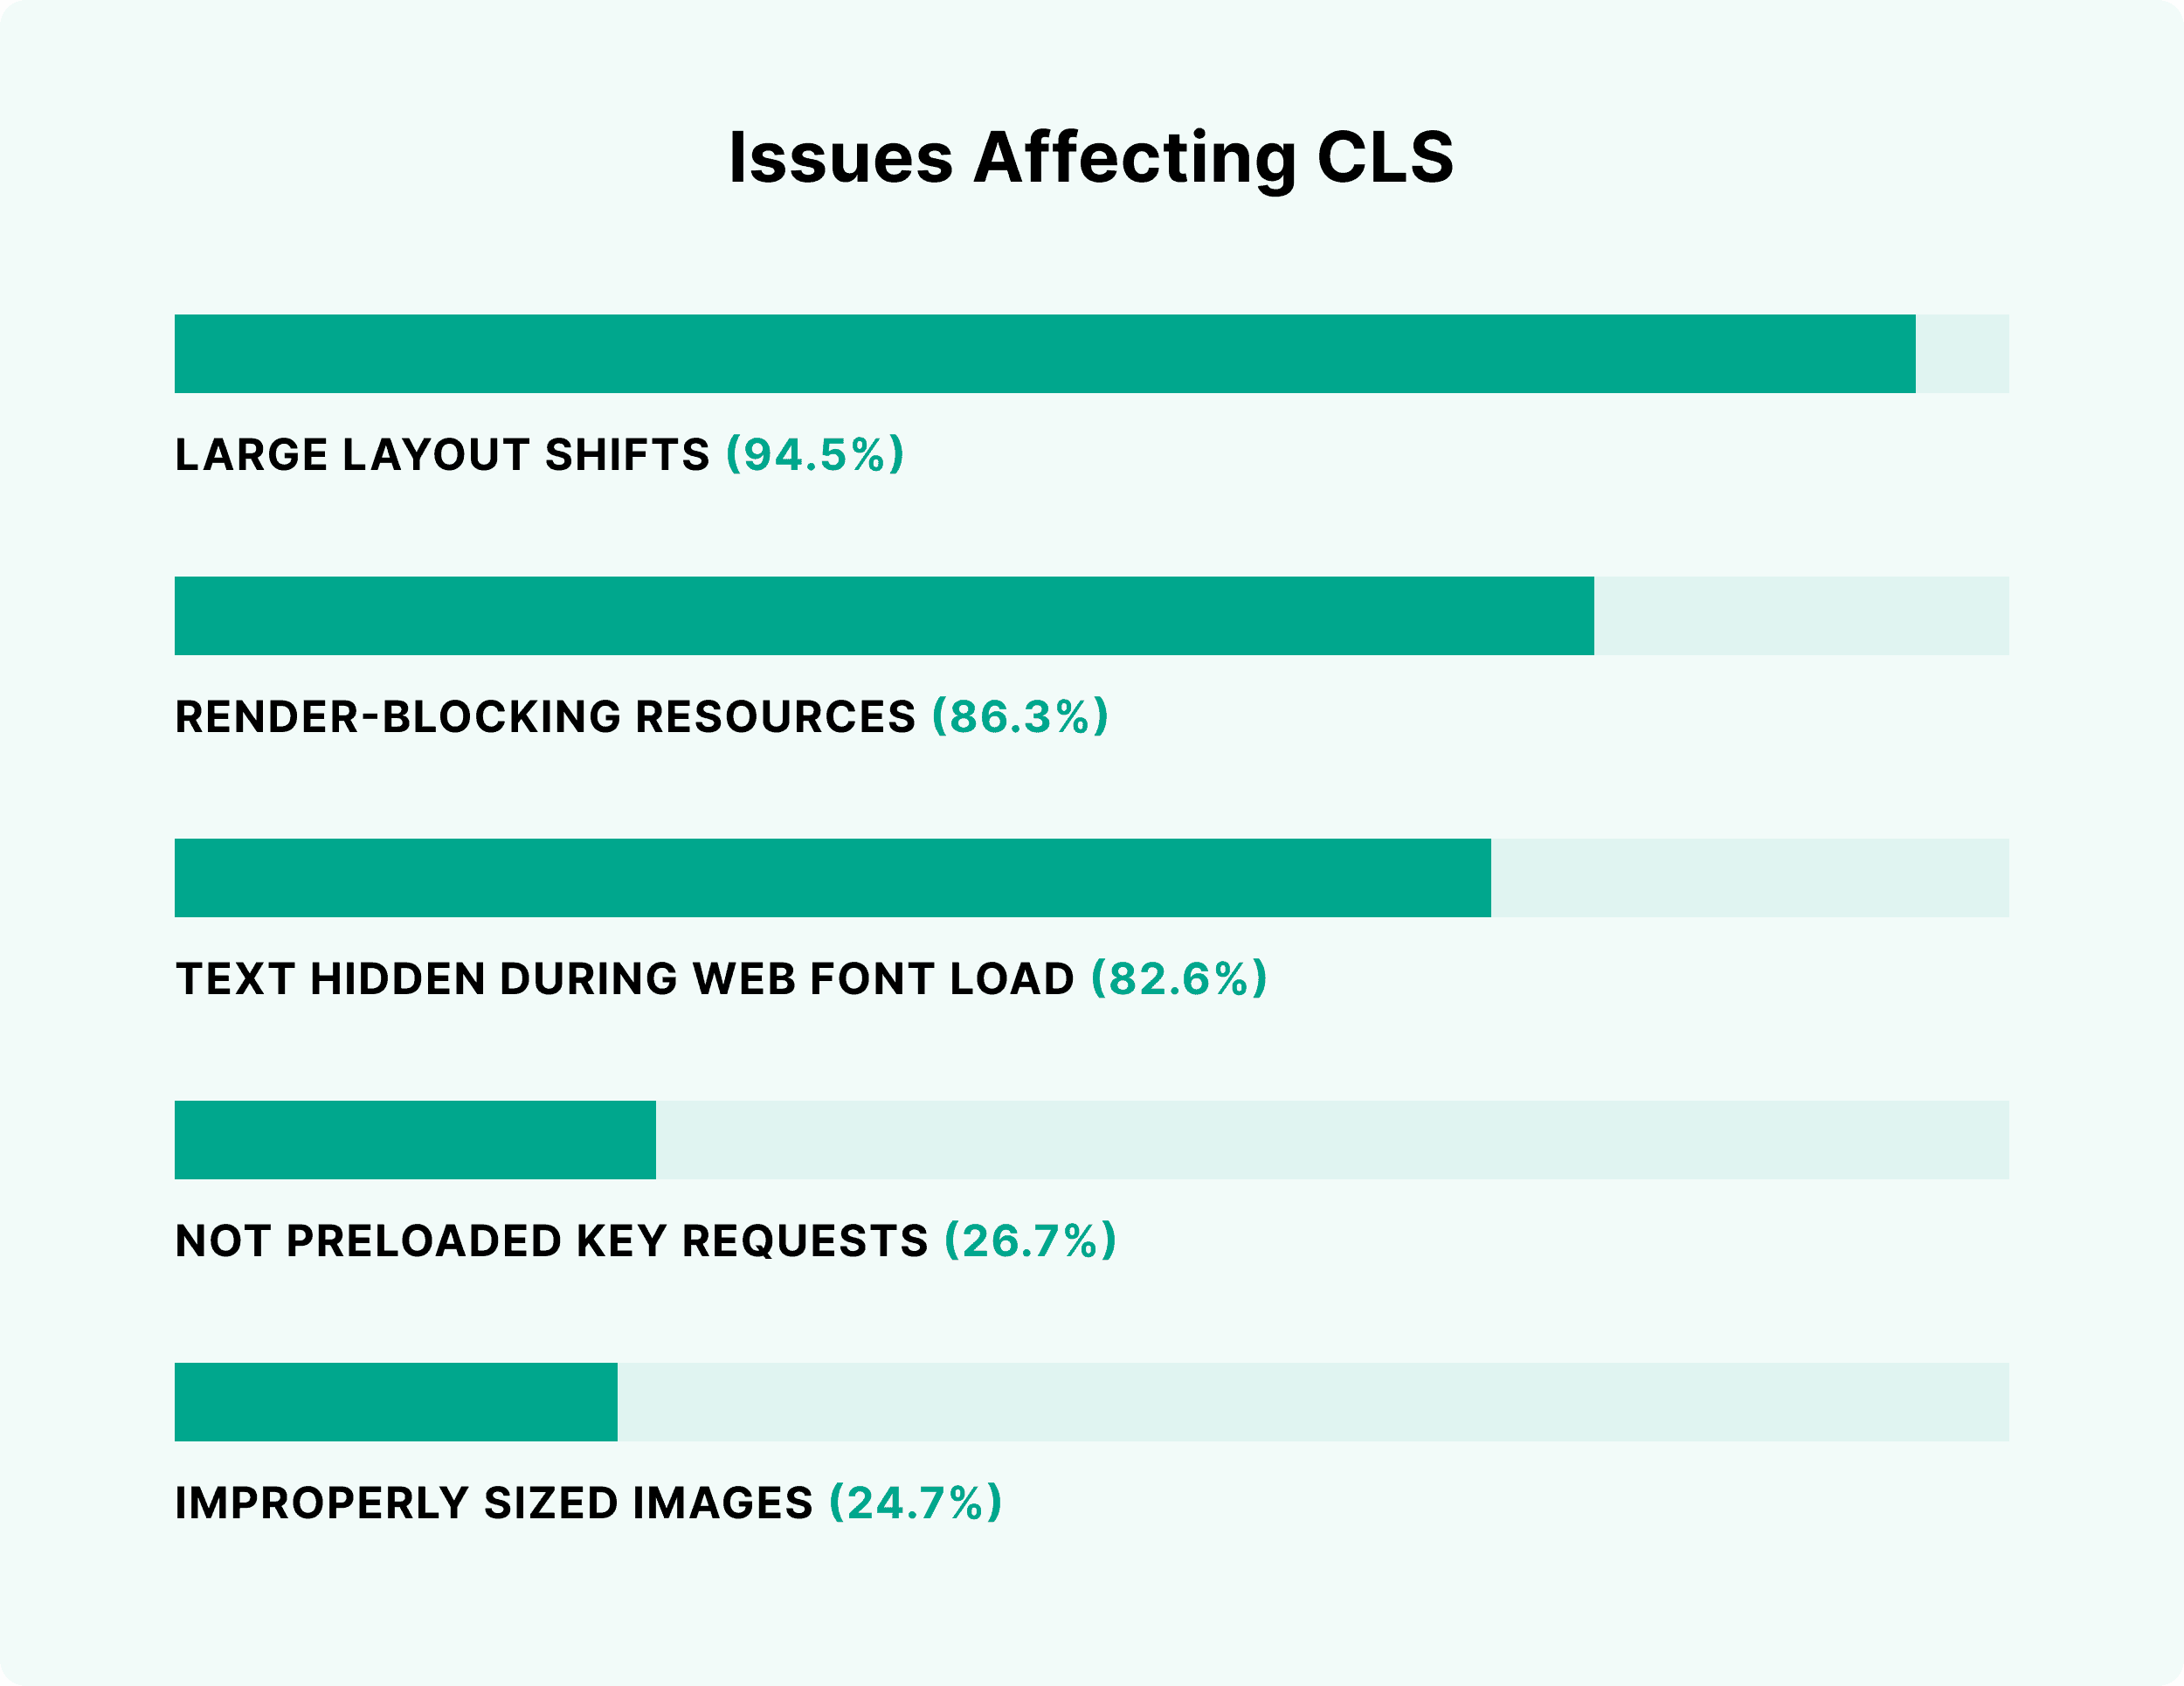 Issues affecting CLS